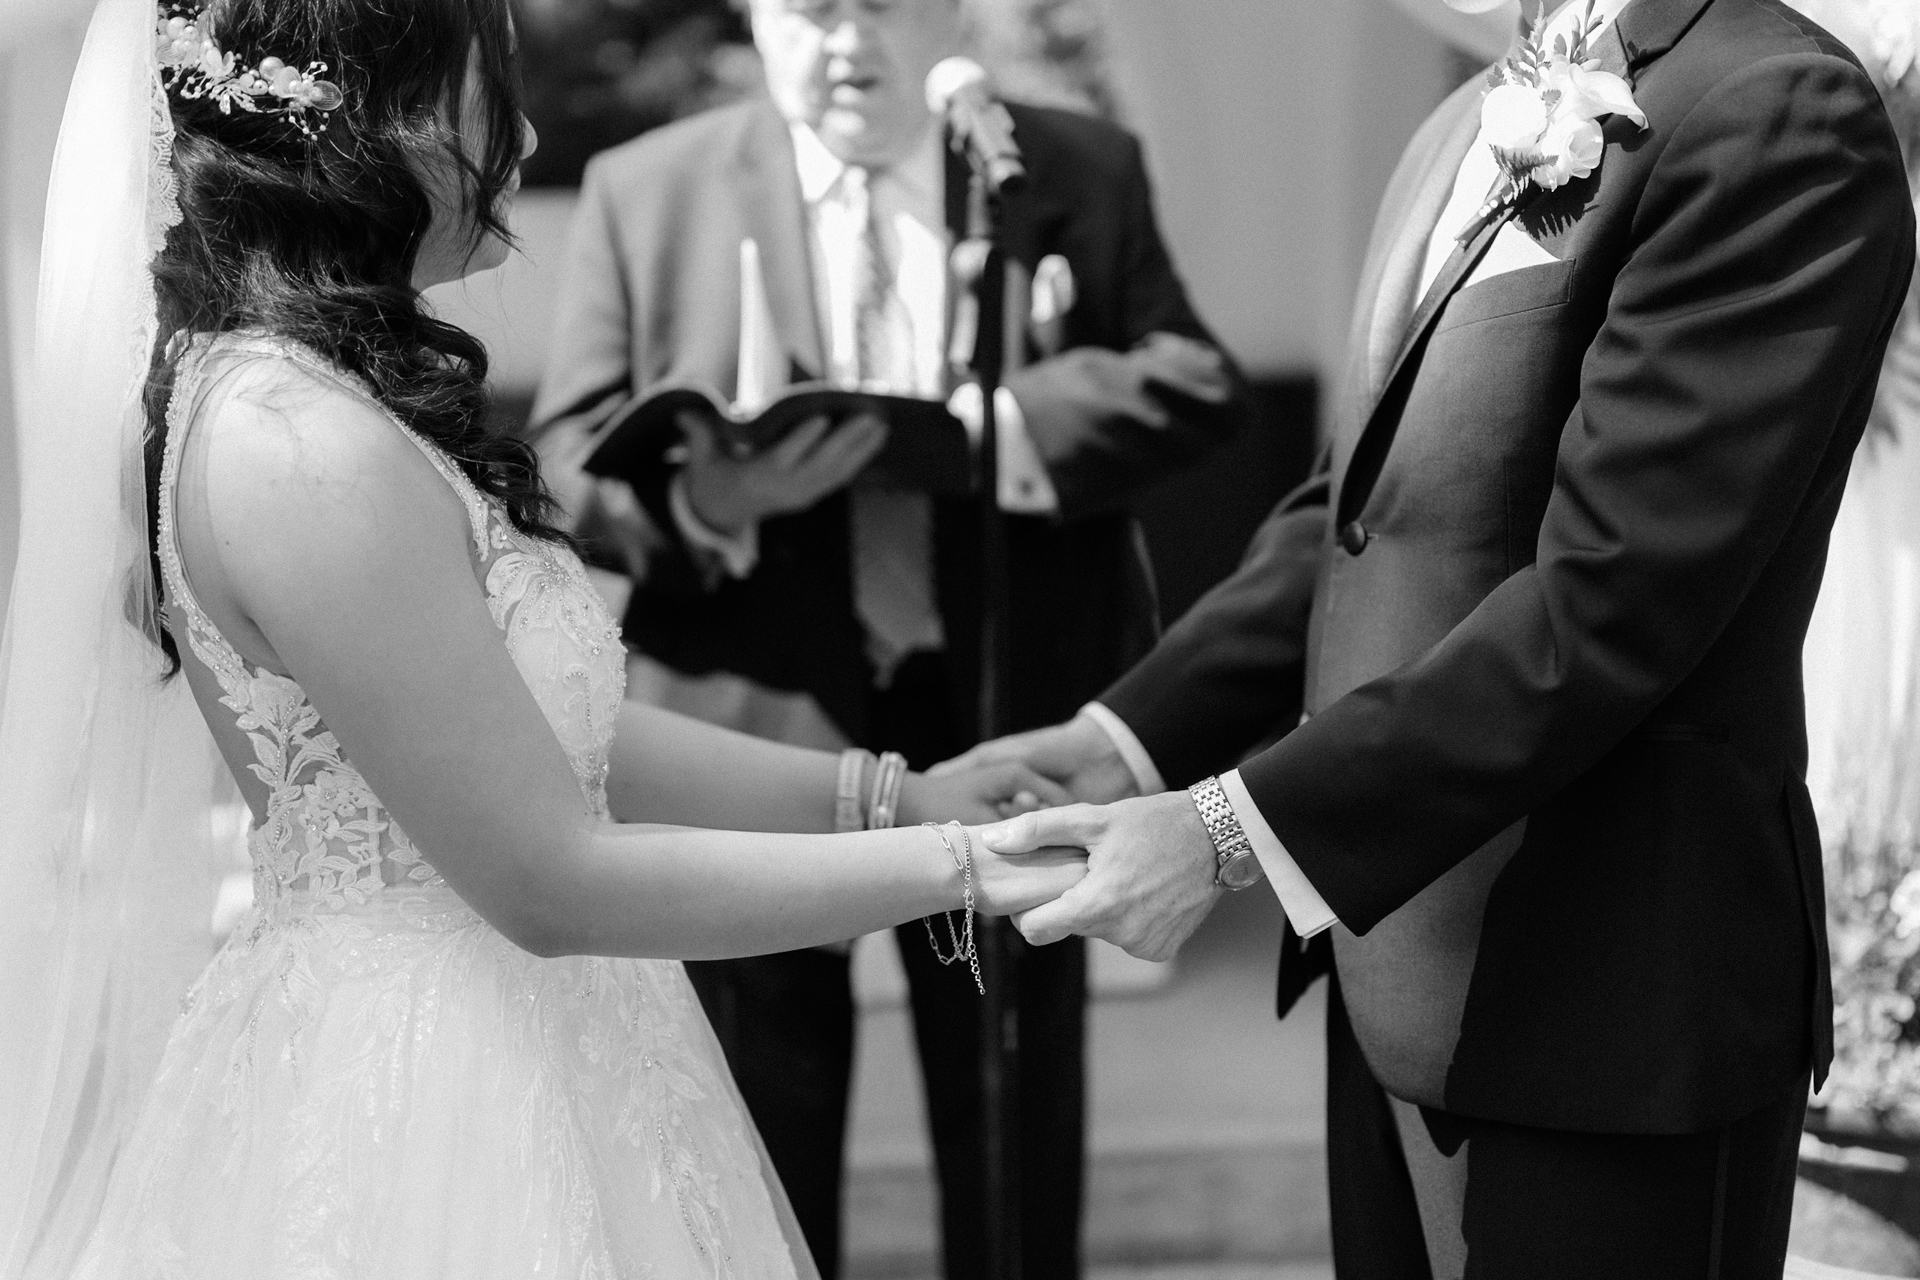 A couple holding hands during their wedding ceremony with an officiant in the background.